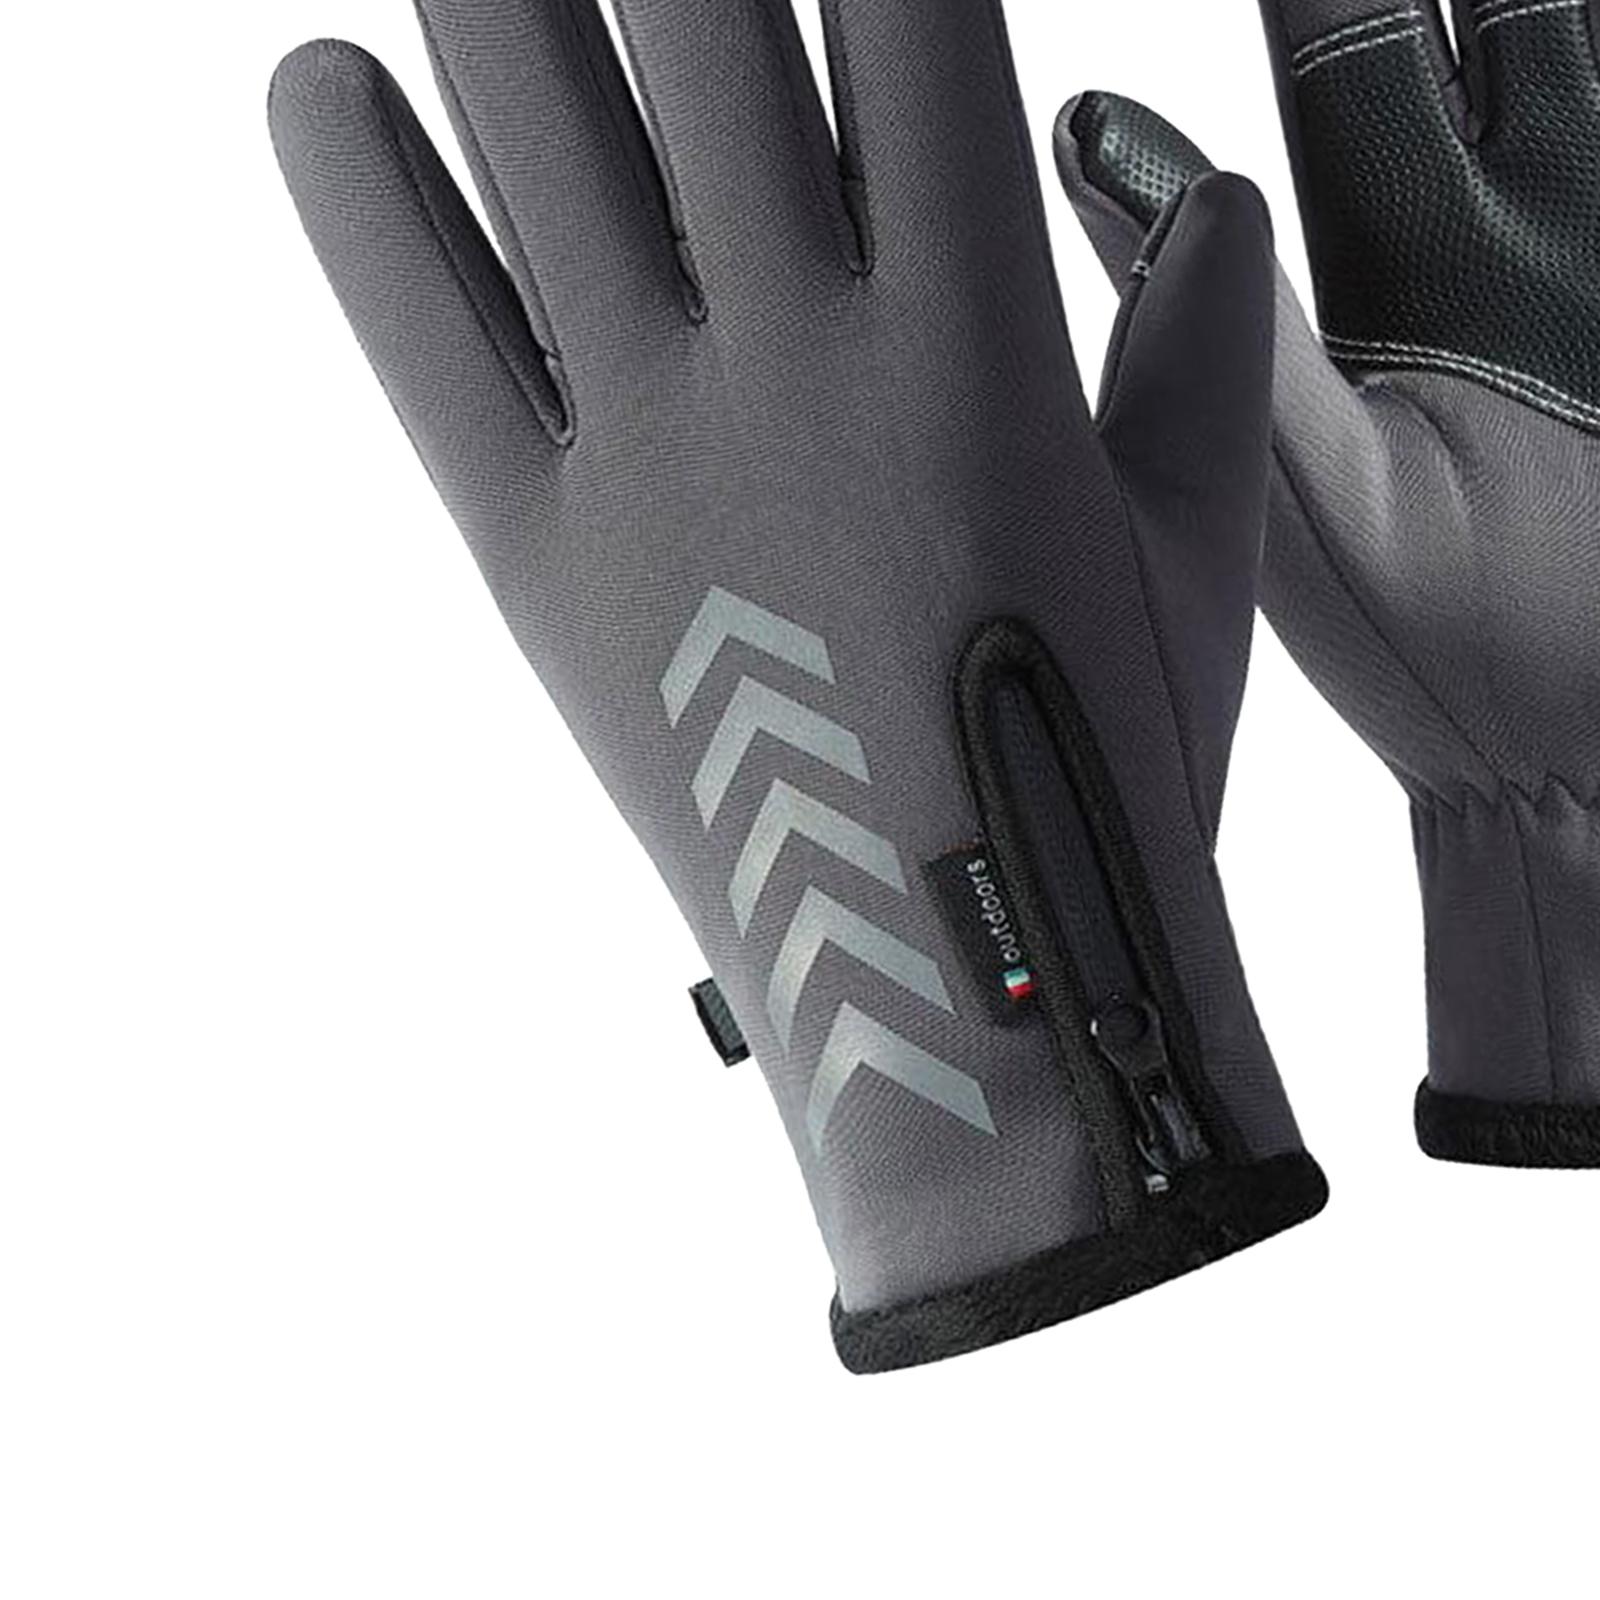 Winter Outdoor Cycling Hiking Sports Gloves Touch Screen L Gray K112